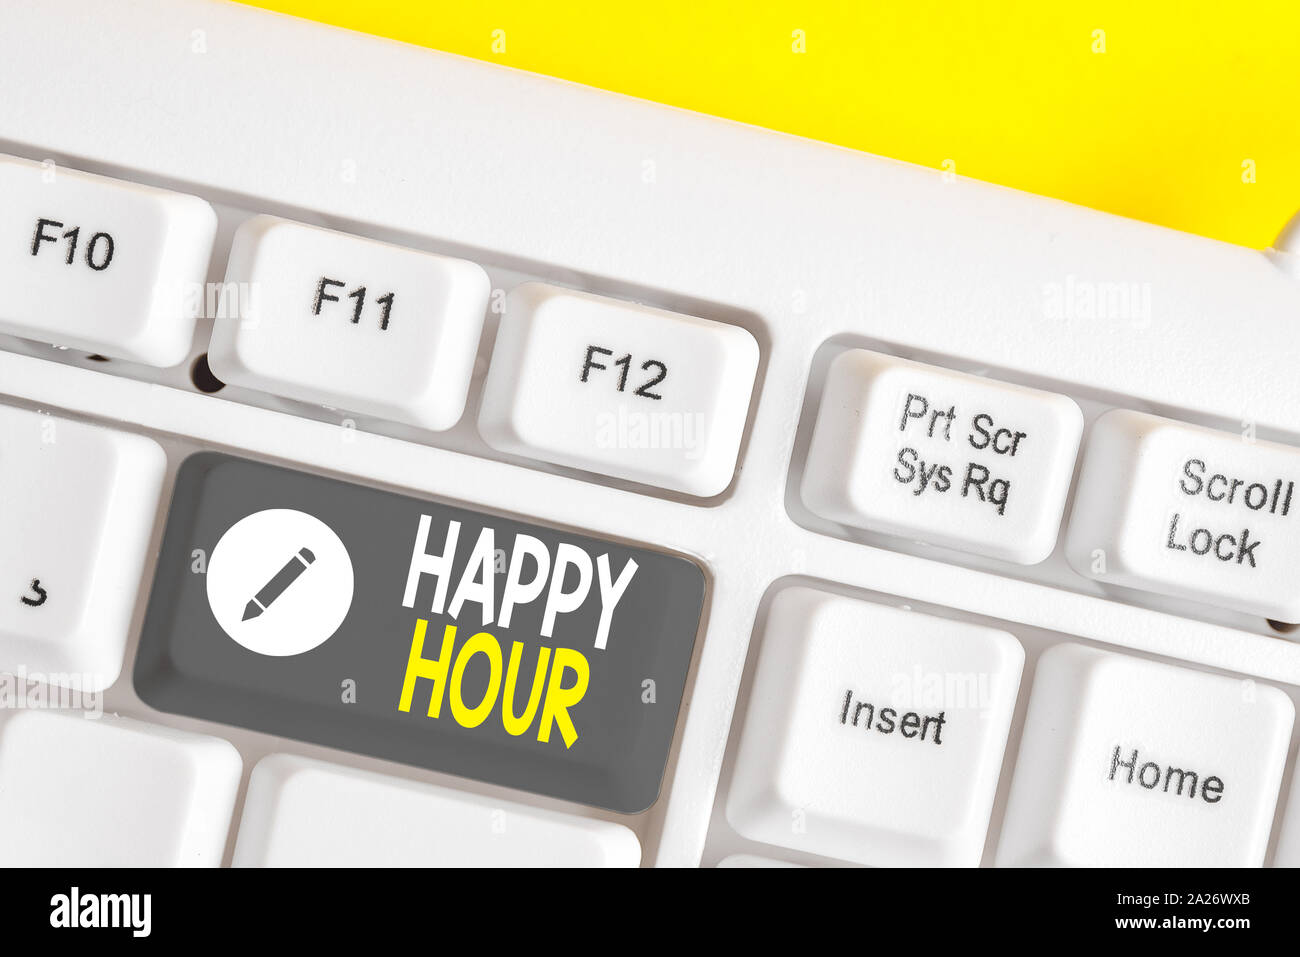 Writing note showing Happy Hour. Business concept for Spending time for activities that makes you relax for a while White pc keyboard with note paper Stock Photo